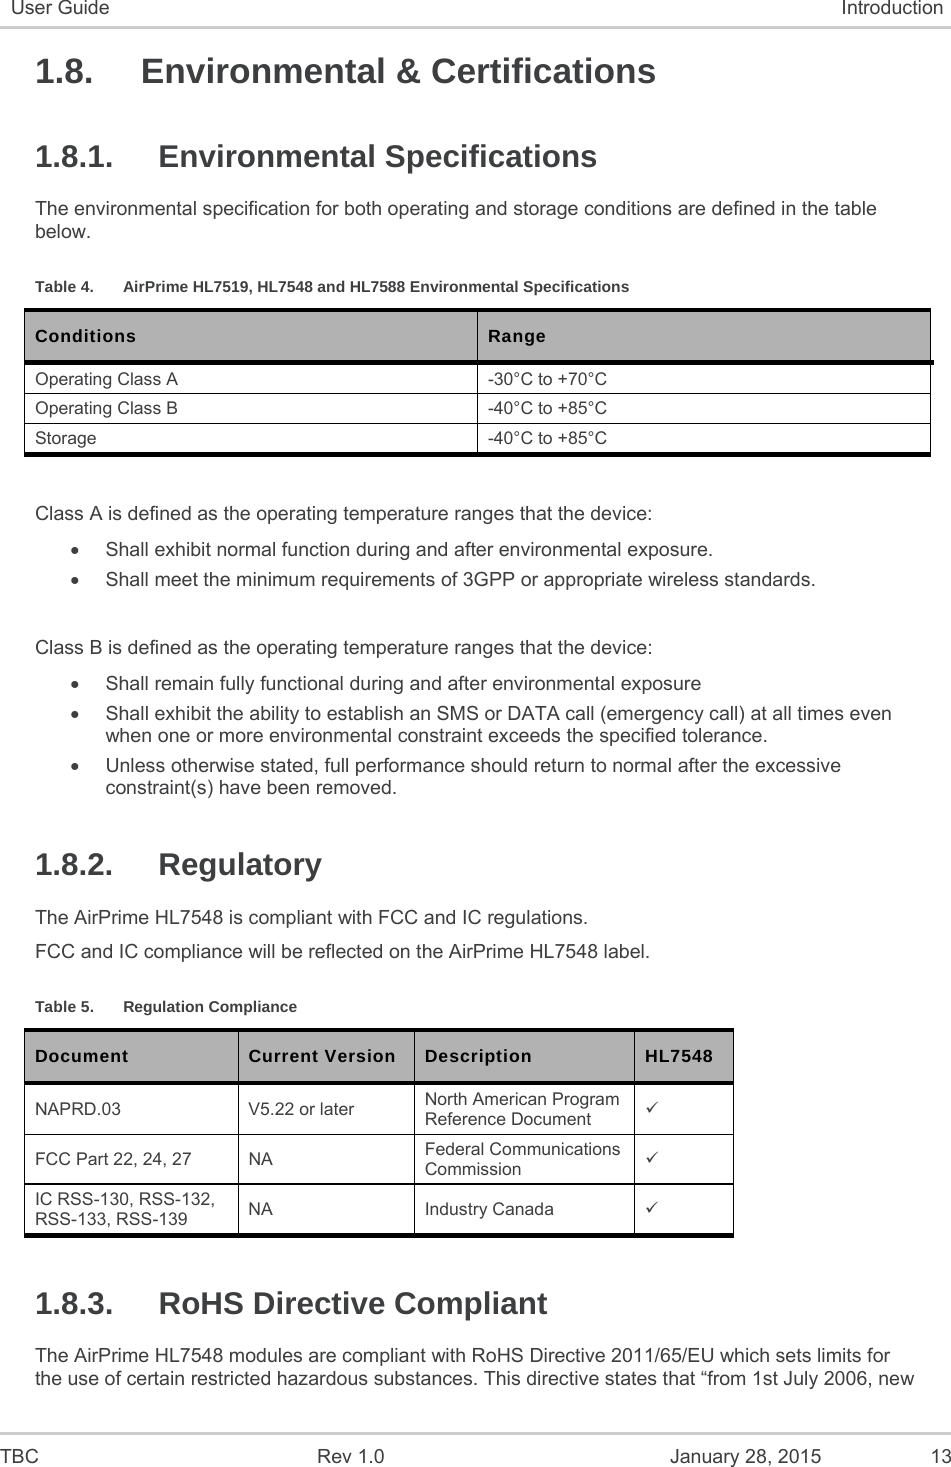  TBC  Rev 1.0  January 28, 2015  13 User Guide  Introduction 1.8. Environmental &amp; Certifications 1.8.1. Environmental Specifications The environmental specification for both operating and storage conditions are defined in the table below. Table 4.  AirPrime HL7519, HL7548 and HL7588 Environmental Specifications Conditions  Range Operating Class A  -30°C to +70°C Operating Class B  -40°C to +85°C Storage  -40°C to +85°C  Class A is defined as the operating temperature ranges that the device:    Shall exhibit normal function during and after environmental exposure.    Shall meet the minimum requirements of 3GPP or appropriate wireless standards.   Class B is defined as the operating temperature ranges that the device:     Shall remain fully functional during and after environmental exposure    Shall exhibit the ability to establish an SMS or DATA call (emergency call) at all times even when one or more environmental constraint exceeds the specified tolerance.    Unless otherwise stated, full performance should return to normal after the excessive constraint(s) have been removed. 1.8.2. Regulatory The AirPrime HL7548 is compliant with FCC and IC regulations. FCC and IC compliance will be reflected on the AirPrime HL7548 label. Table 5.  Regulation Compliance Document  Current Version  Description  HL7548 NAPRD.03  V5.22 or later   North American Program Reference Document   FCC Part 22, 24, 27  NA  Federal Communications Commission    IC RSS-130, RSS-132, RSS-133, RSS-139  NA Industry Canada  1.8.3. RoHS Directive Compliant The AirPrime HL7548 modules are compliant with RoHS Directive 2011/65/EU which sets limits for the use of certain restricted hazardous substances. This directive states that “from 1st July 2006, new 